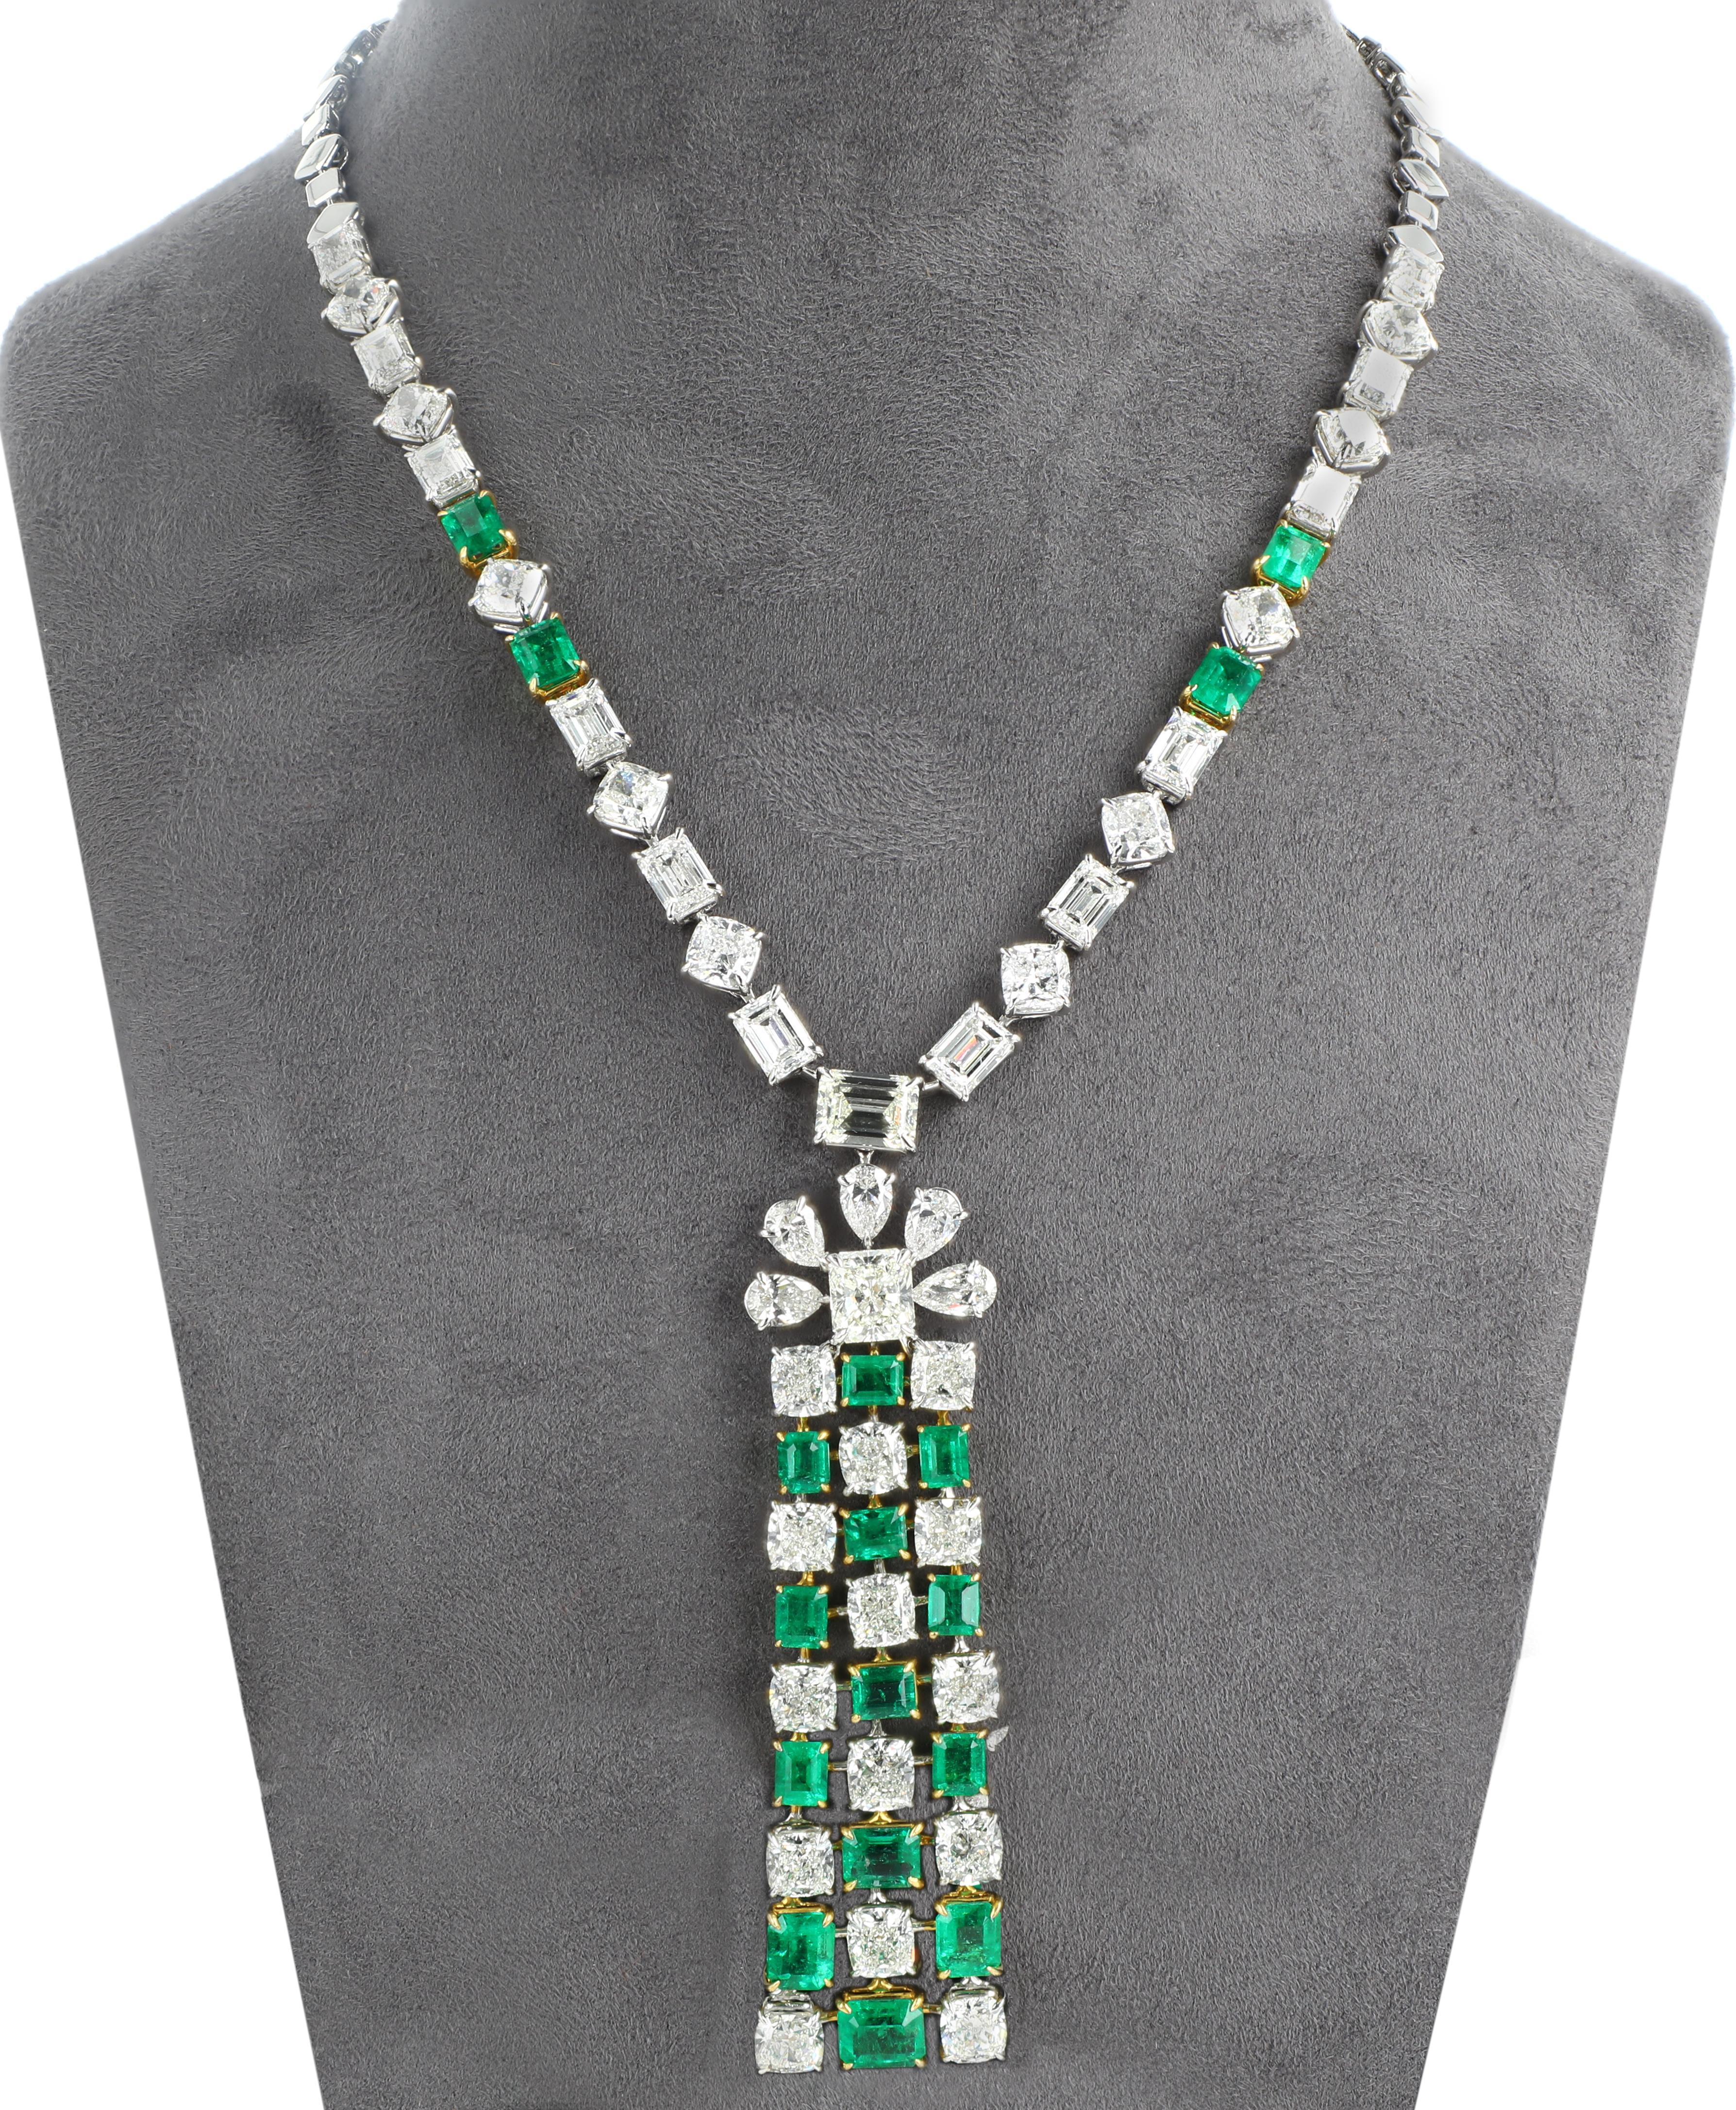 An elegant emerald and diamond necklace.

10.50 carats of vibrant and color rich Colombian emeralds, 42.34 carats of white fancy shaped certified diamonds.